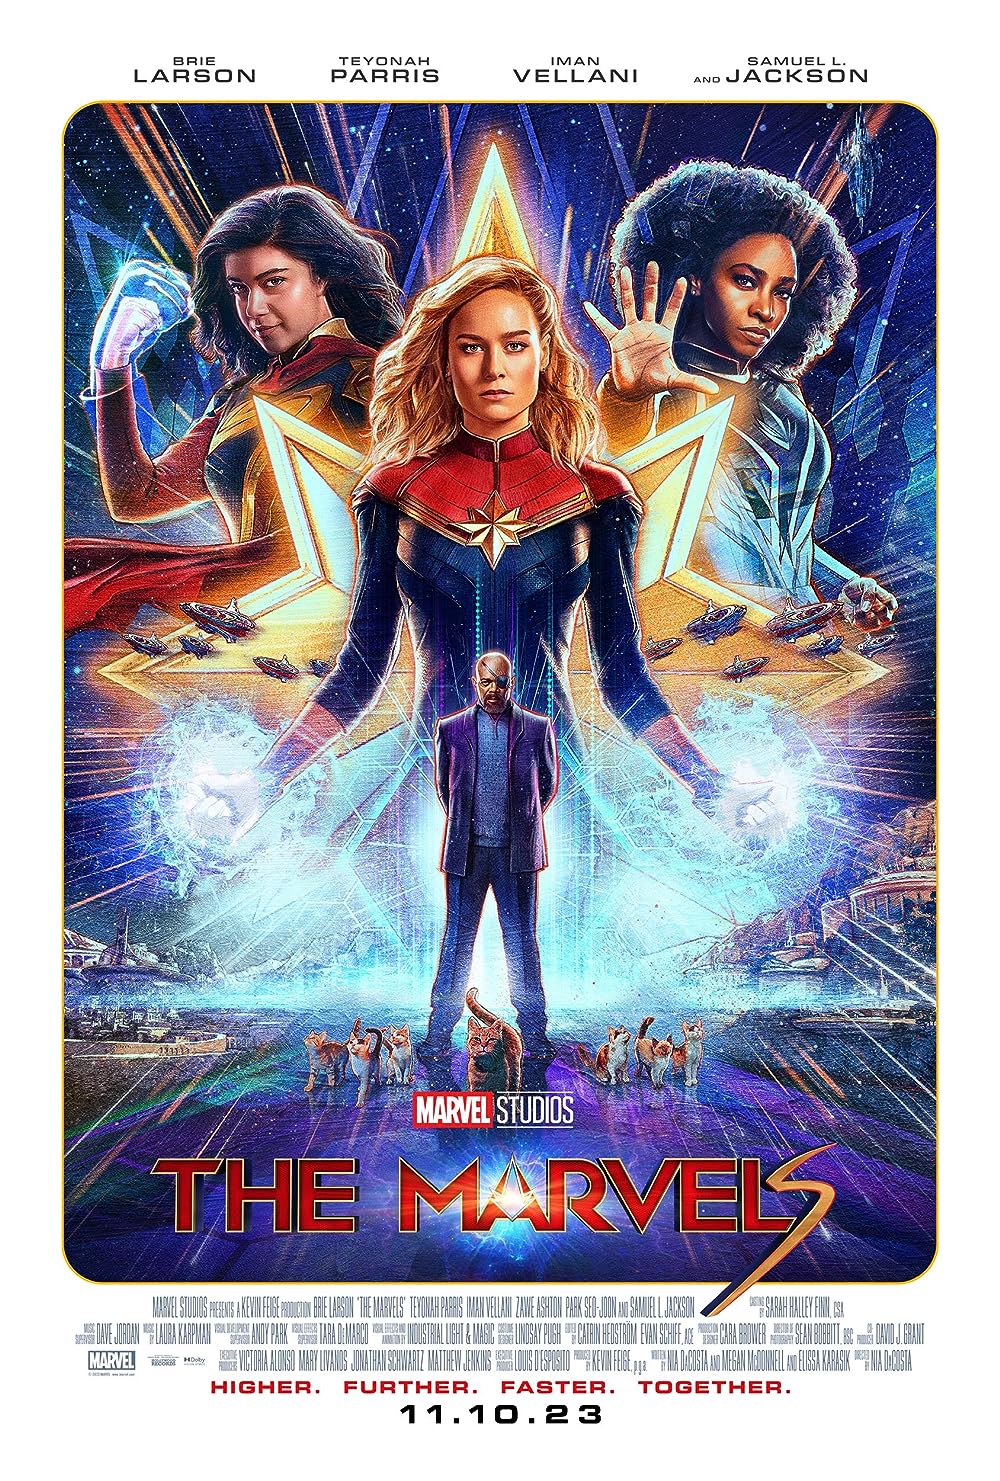 The Marvels - November 10This Diwali, it’s time to go Higher, Further, Faster and Together as the much-awaited Marvel Studios 'The Marvels' is here, promising intense action, adventure and full-on family entertainment this festive season! 